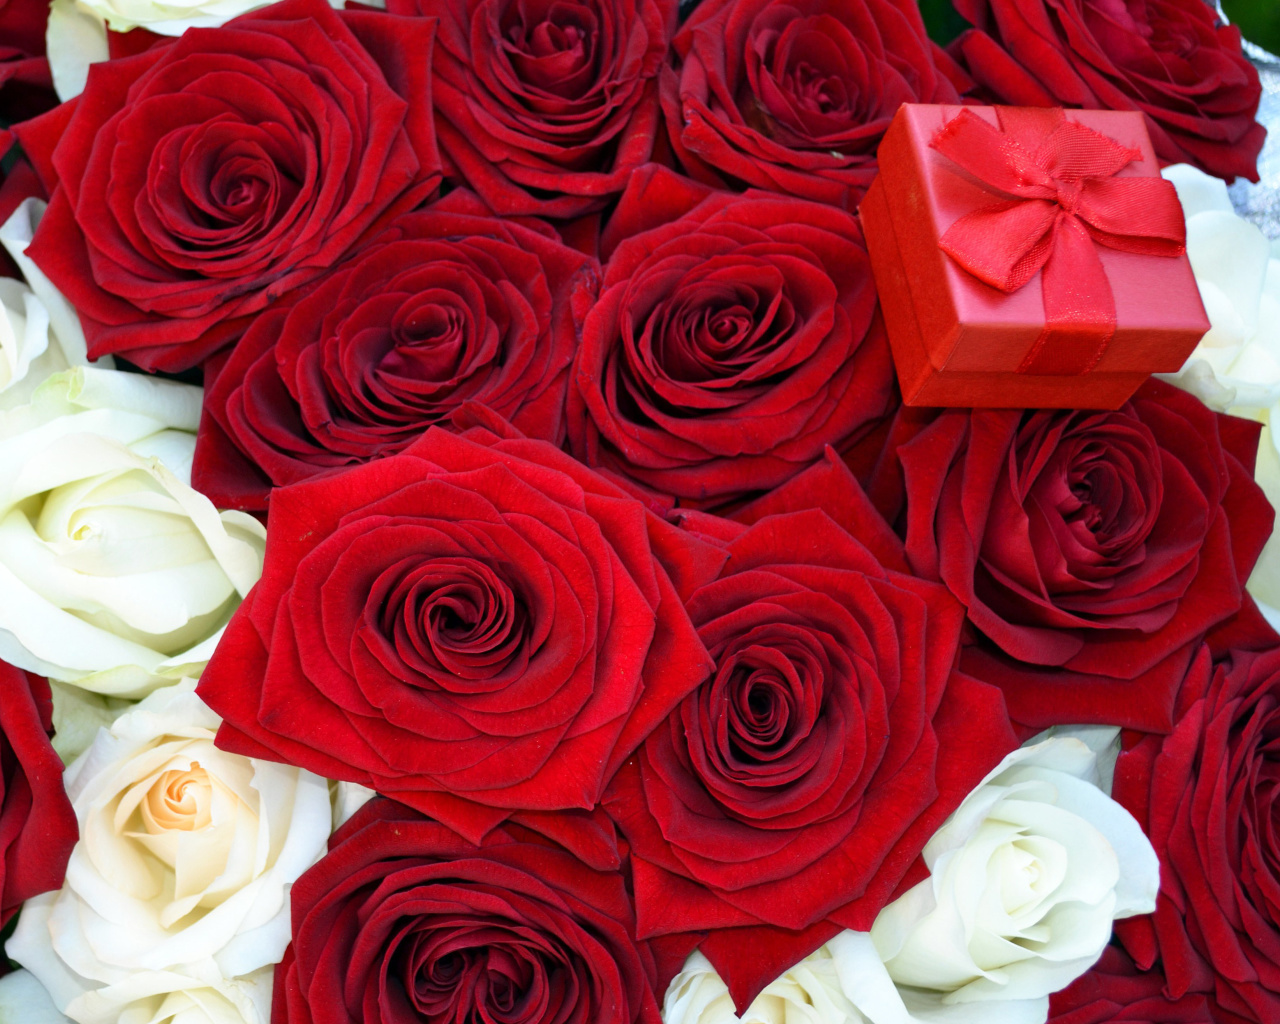 Das Roses for Propose Wallpaper 1280x1024